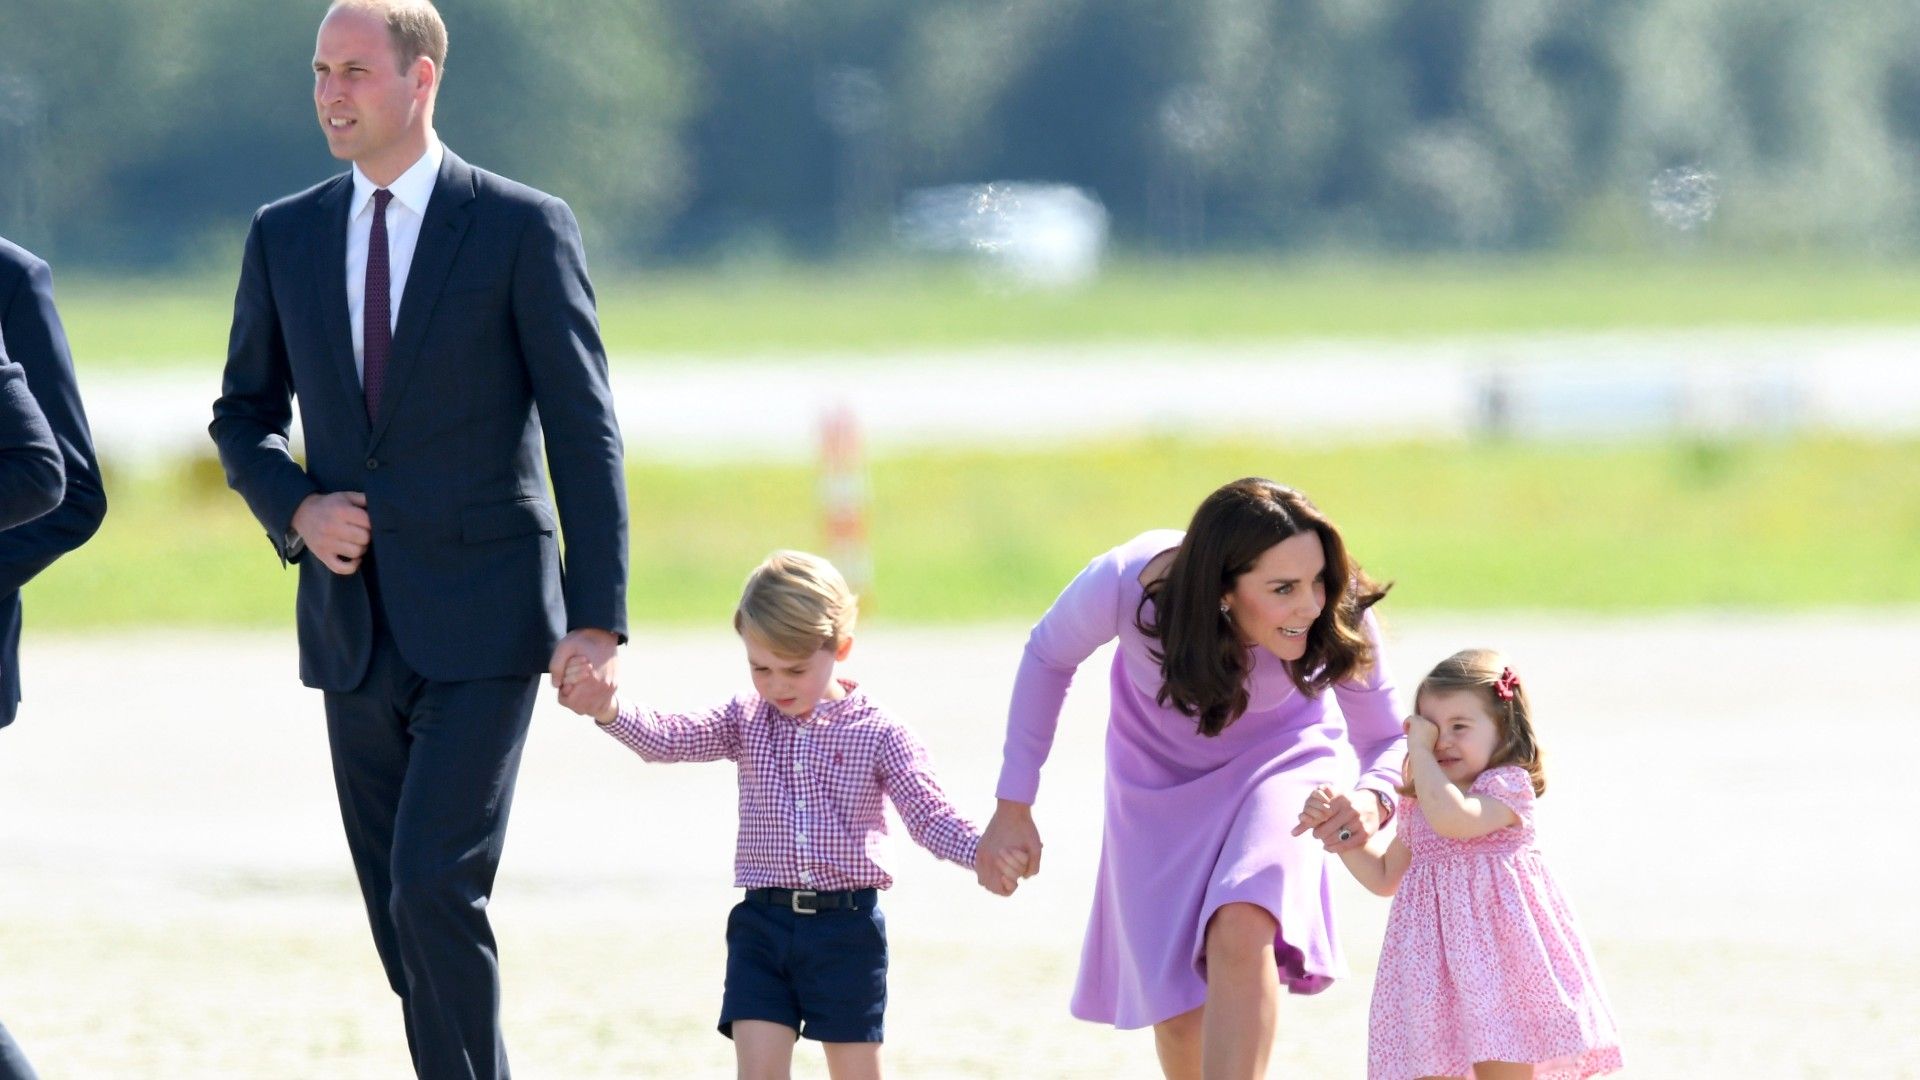 <p>                     It's long been understood that the Royal Family tend to send subtle messages with their clothing - and that's partly why it's normal to see the Wales clan in particular all kitted out in various shades of blue.                   </p>                                      <p>                     However, back in 2017 during a tour of Germany, the family went matching once again in a different colour.                   </p>                                      <p>                     Looking pastel and springy, Kate Middleton stunned in a lilac Emilia Wickstead dress, while George and Charlotte matched in pink and purple hues.                   </p>                                      <p>                     Touring countries with two young children seems like a task in itself, to do so while pulling off a synchronised fashion moment? Exquisite work.                   </p>